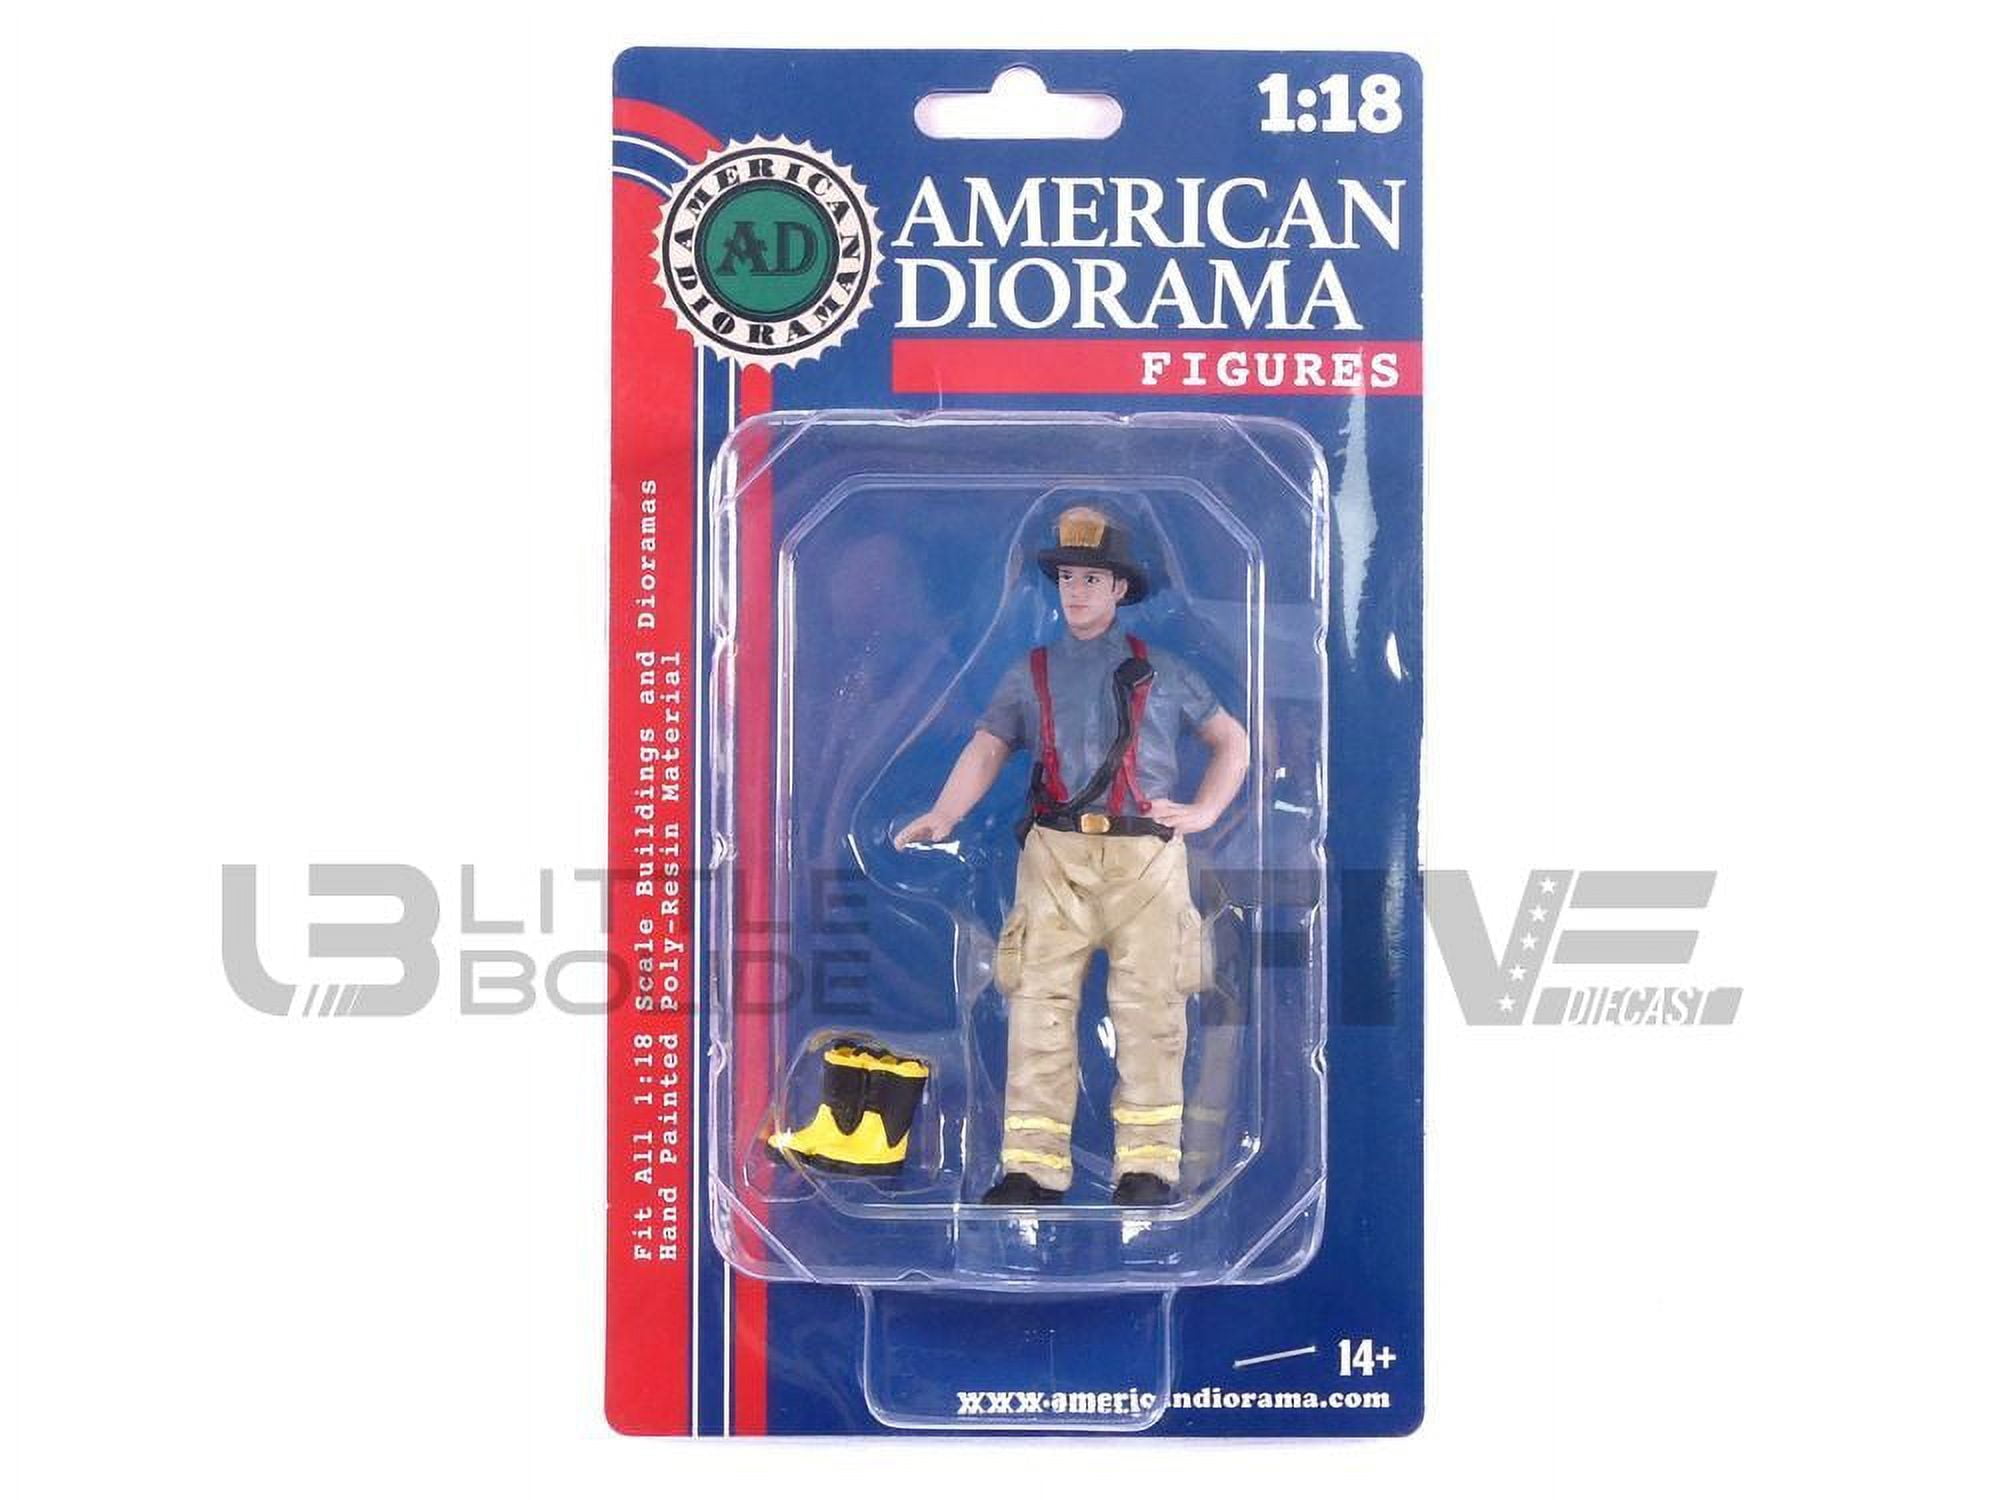 Picture of American Diorama AD76319 Firefighters Getting Ready Figure with Boots Accessory for 1 by 18 Scale Models